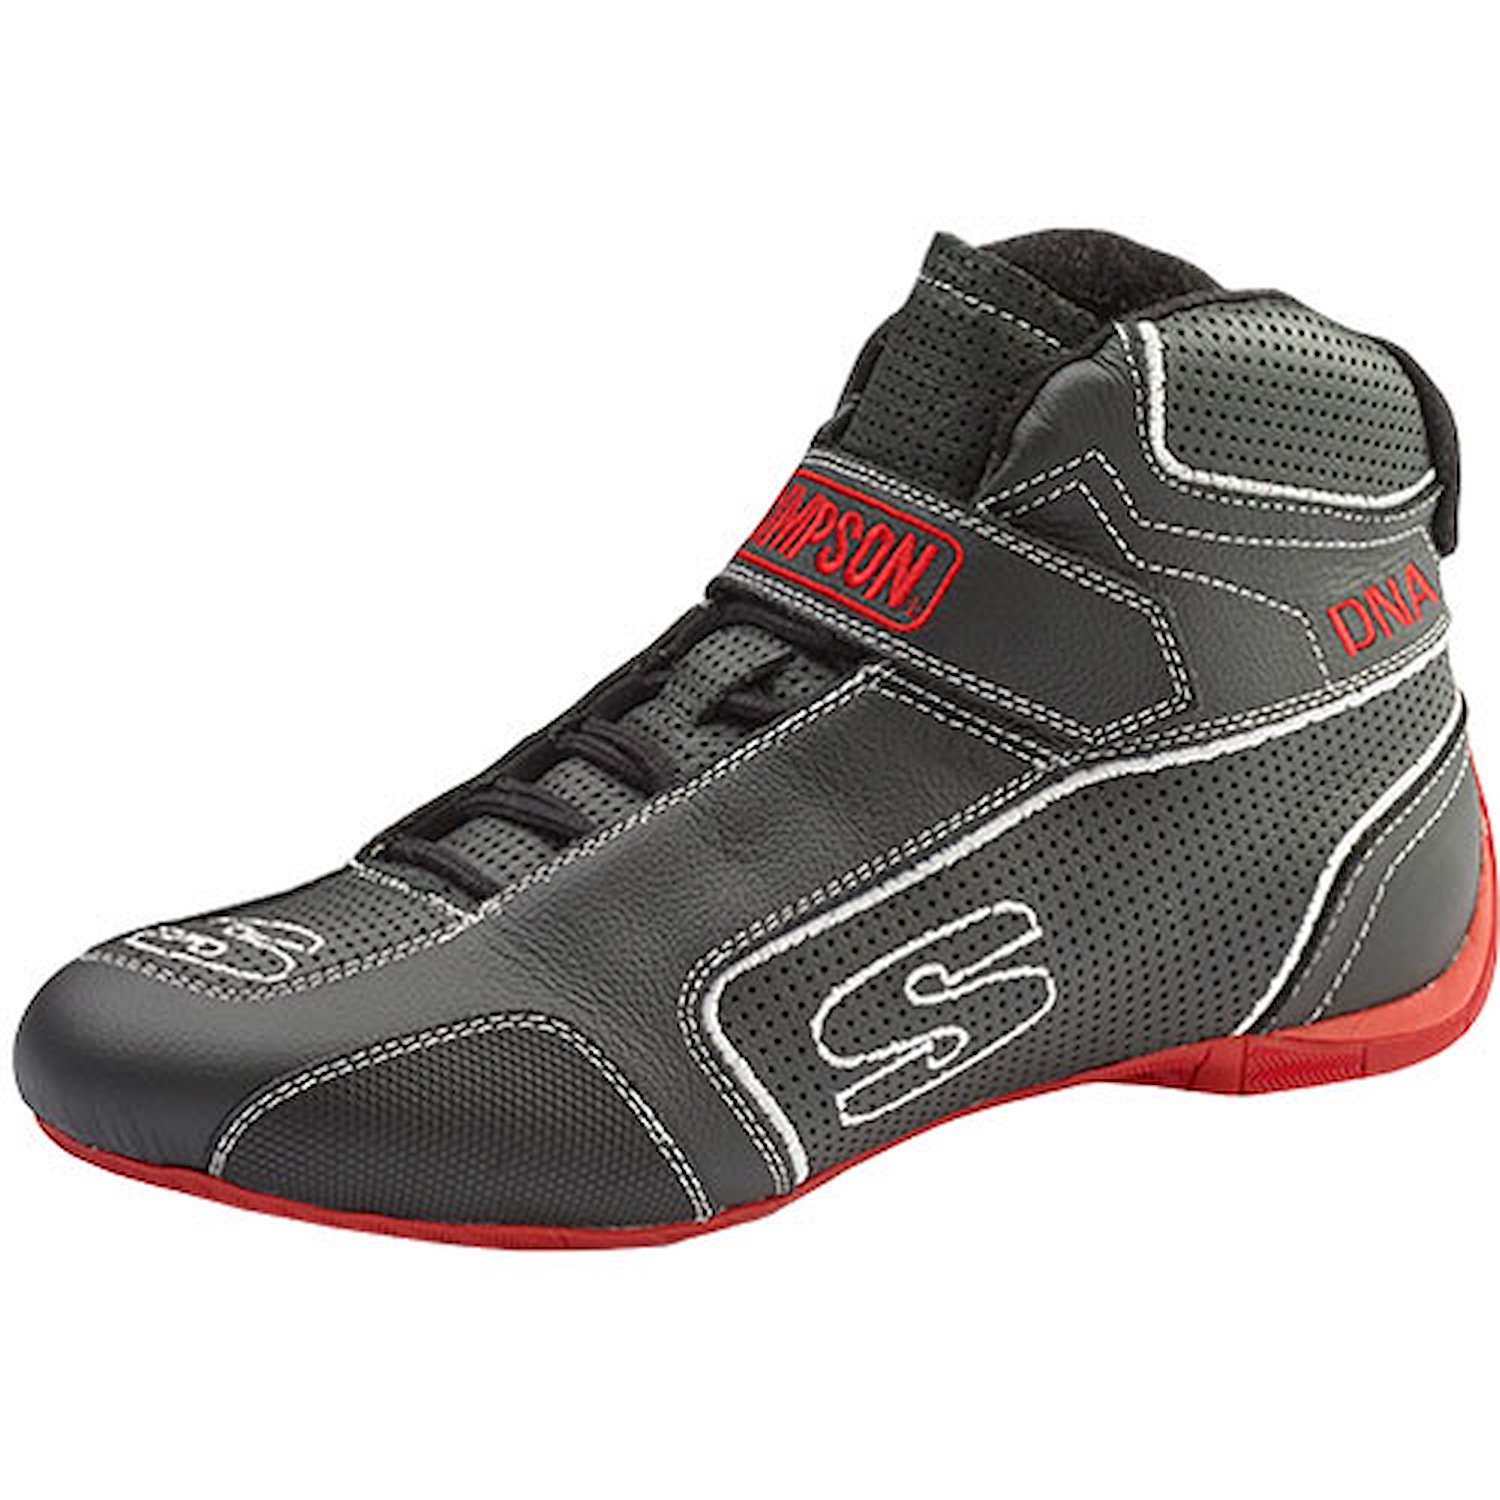 SFI 3.3/5 DNA Racing Shoes Size: 13.5